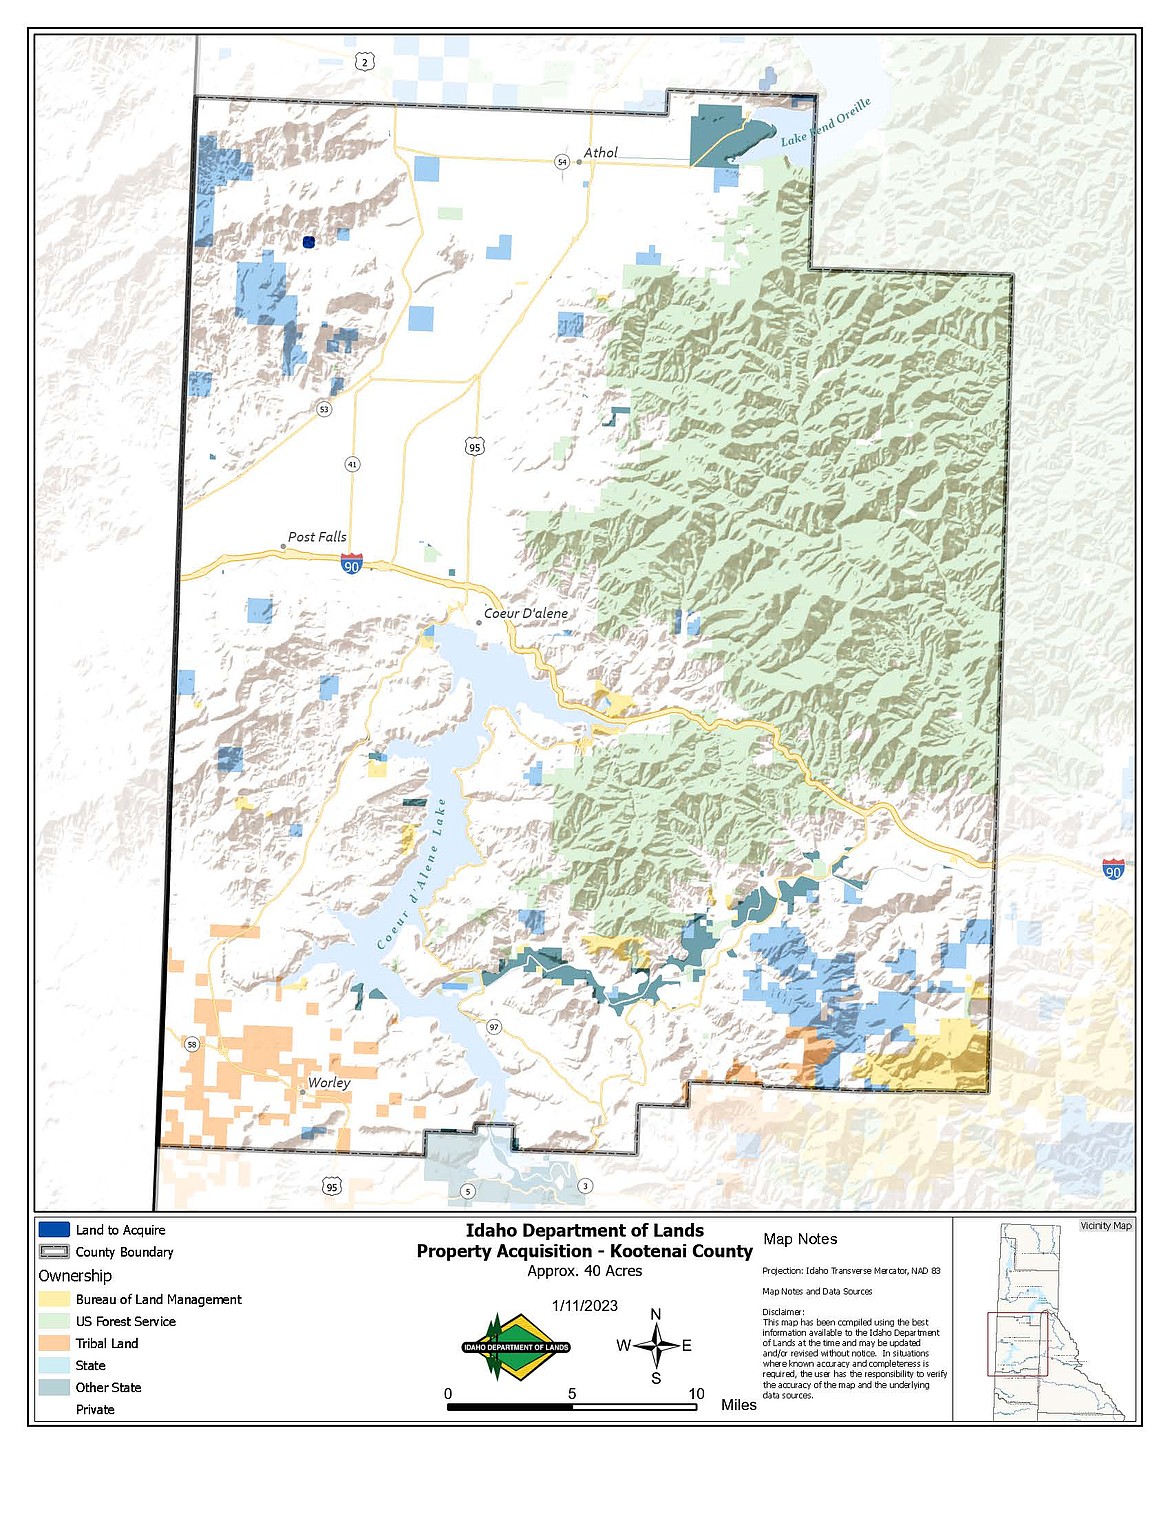 Idaho Department of Lands announced it purchased almost 18,050 acres of timberland spread across five north Idaho counties. Above, a map shows the location of the parcels purchased in Kootenai County.